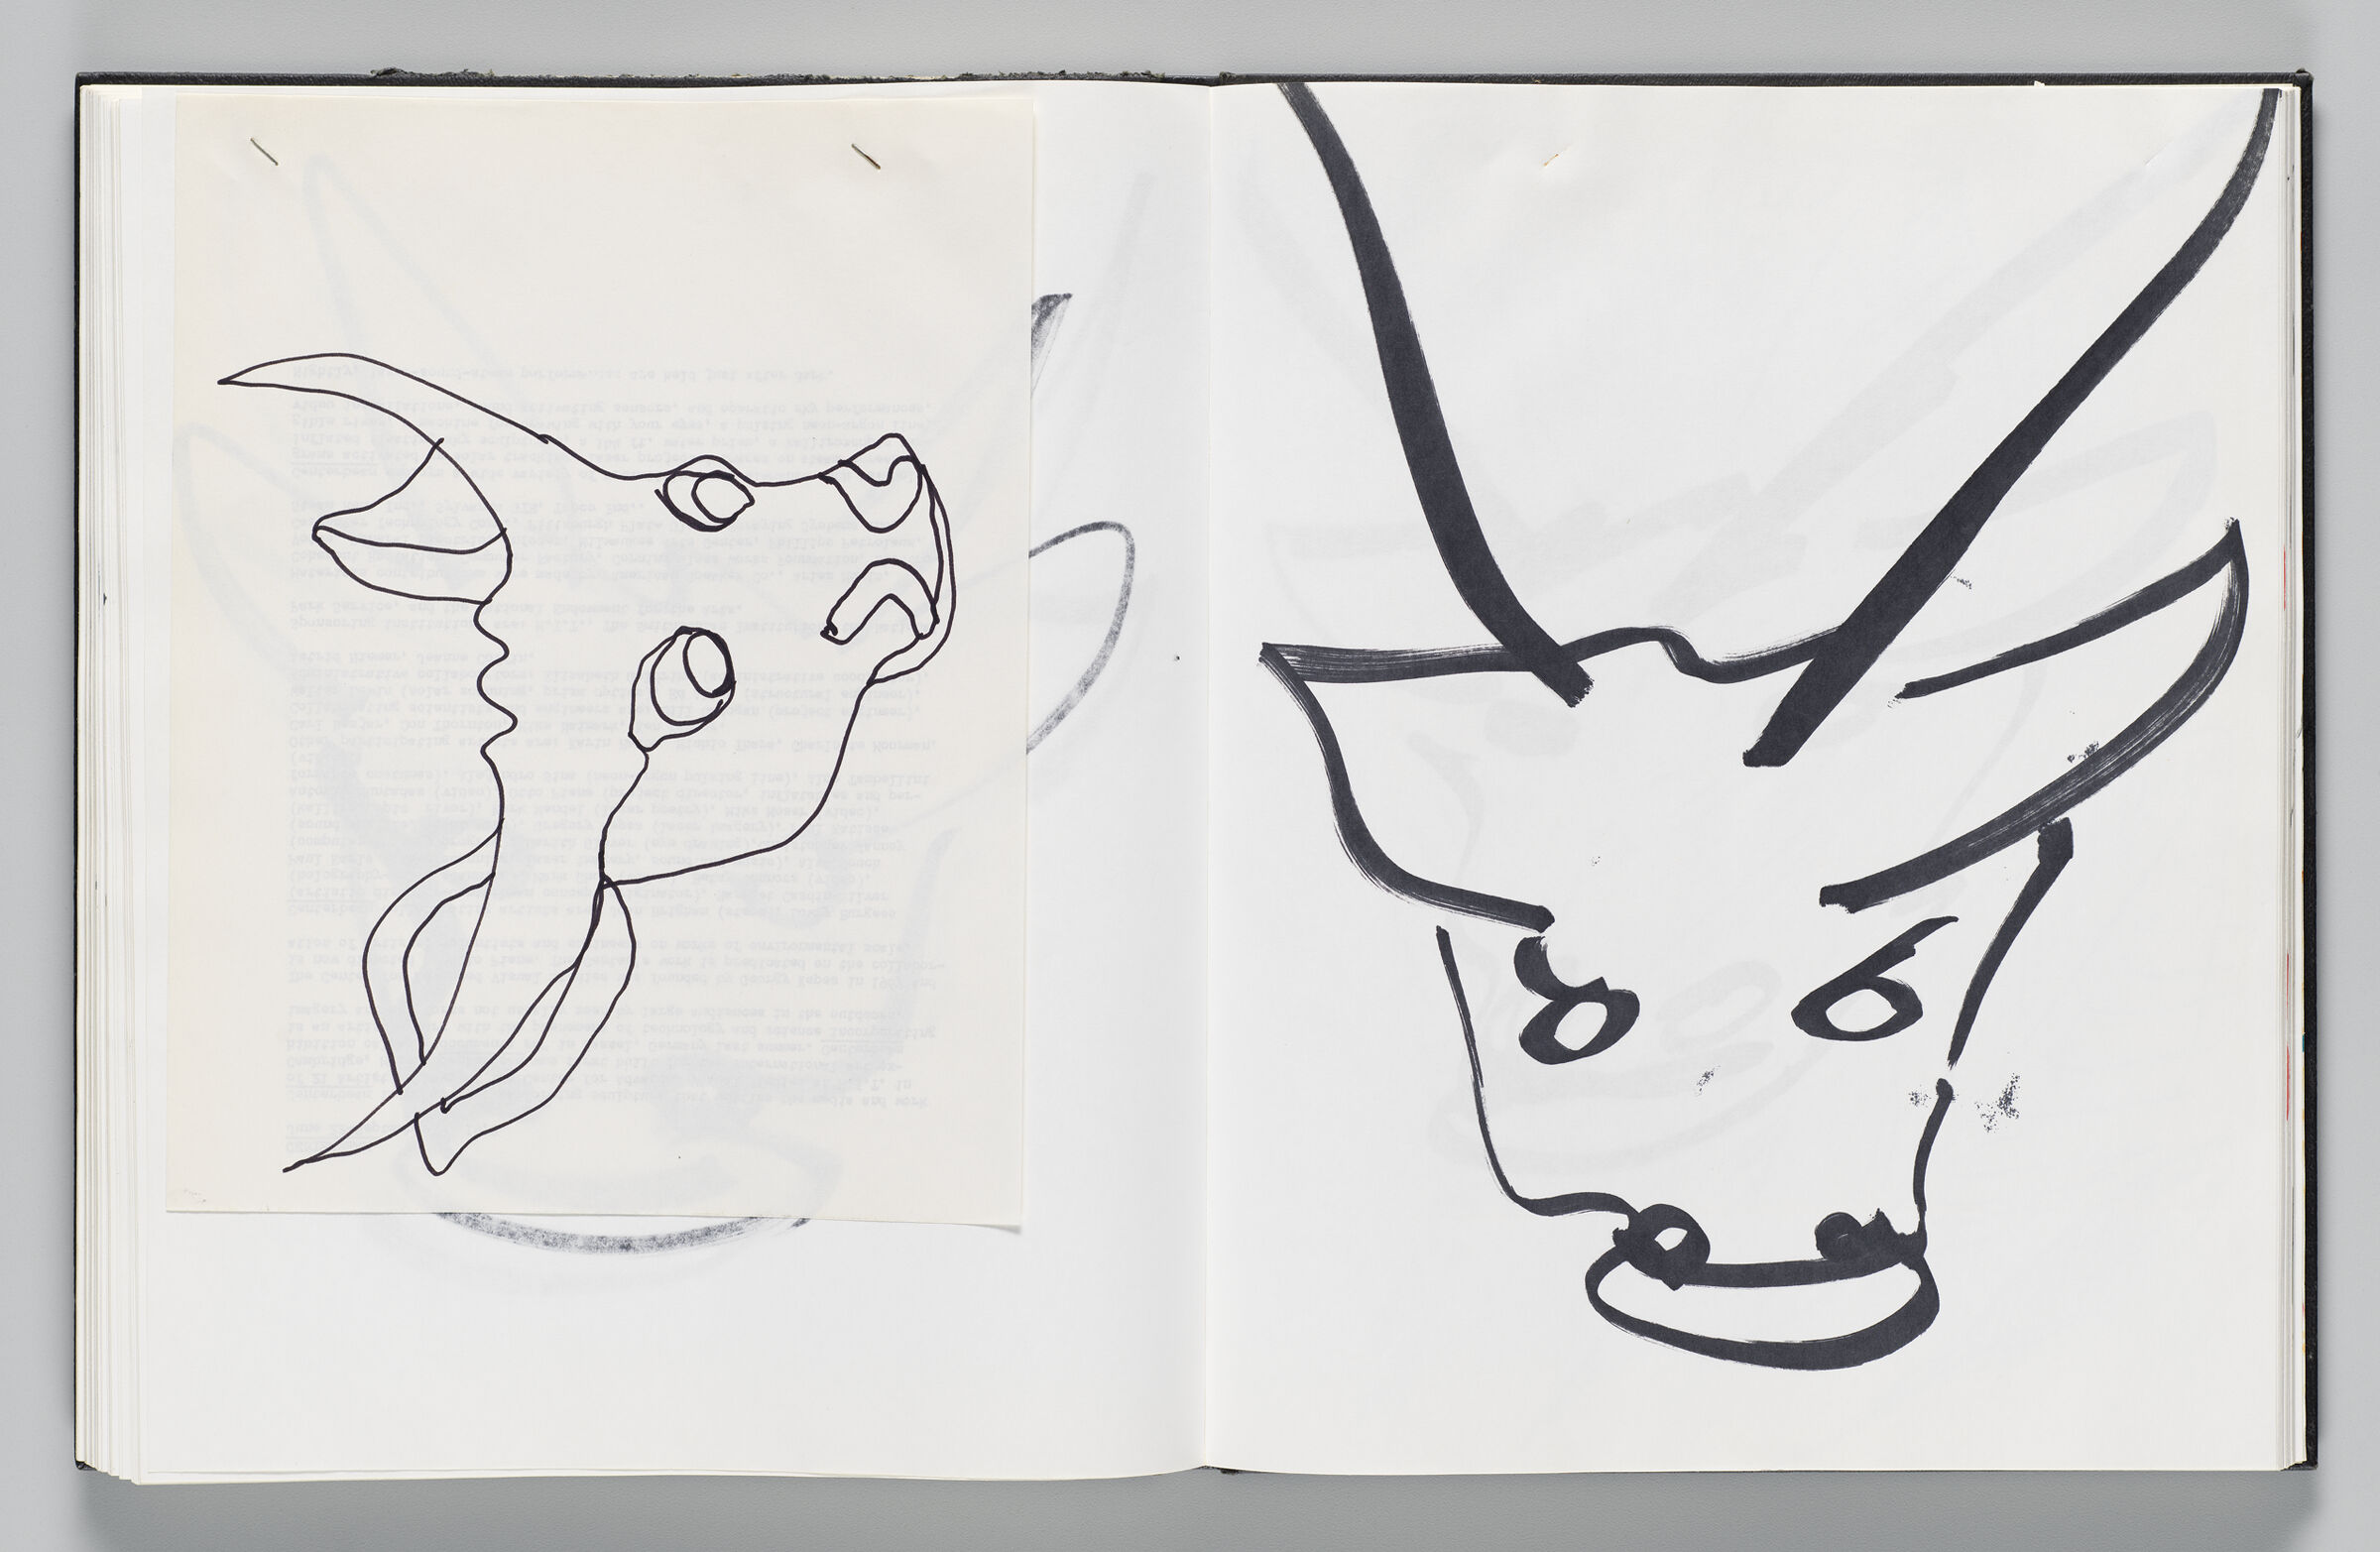 Untitled (Bleed-Through Of Previous Page With Stapled Sketch Of Minotaur Head, Left Page); Untitled (